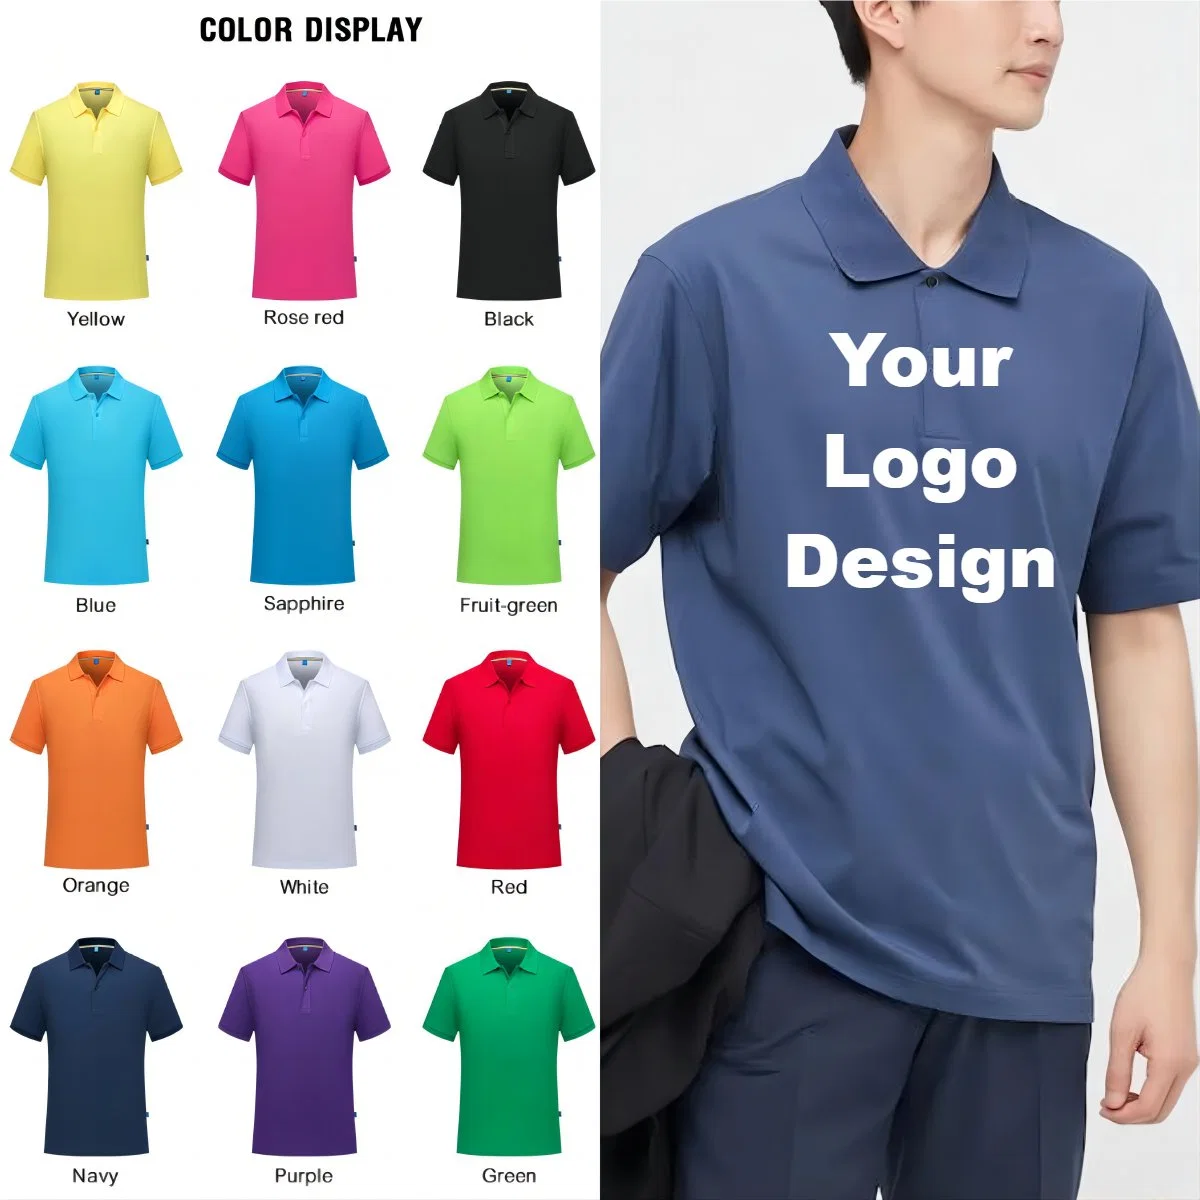 2023 New Summer Customized Casual Plain Short-Sleeve Enterprise Colorful Soft Comfortable Cotton Polyester Put Your Logo Polo Shirts